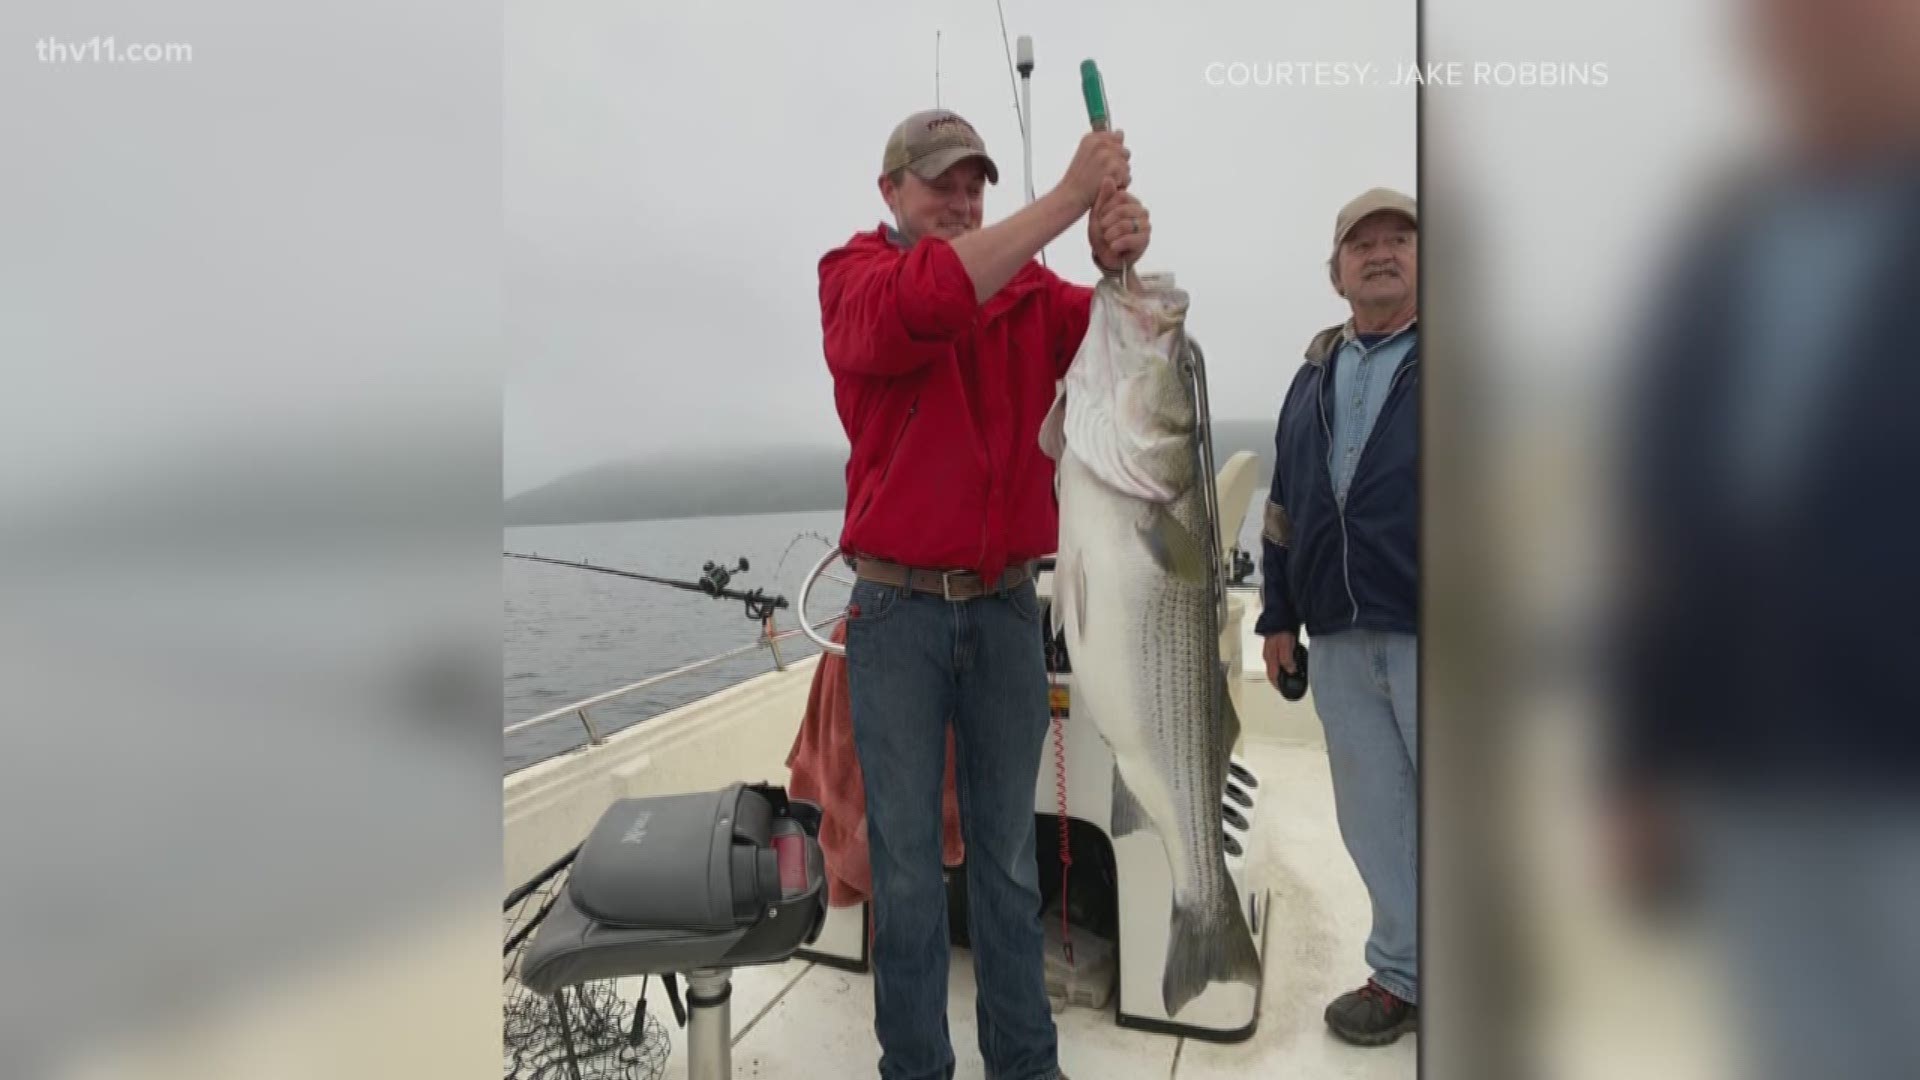 It's tempting to come up with a grand story when someone asks what you did over the weekend.
A Cabot man came back from a weekend on the lake with quite a fish tale.